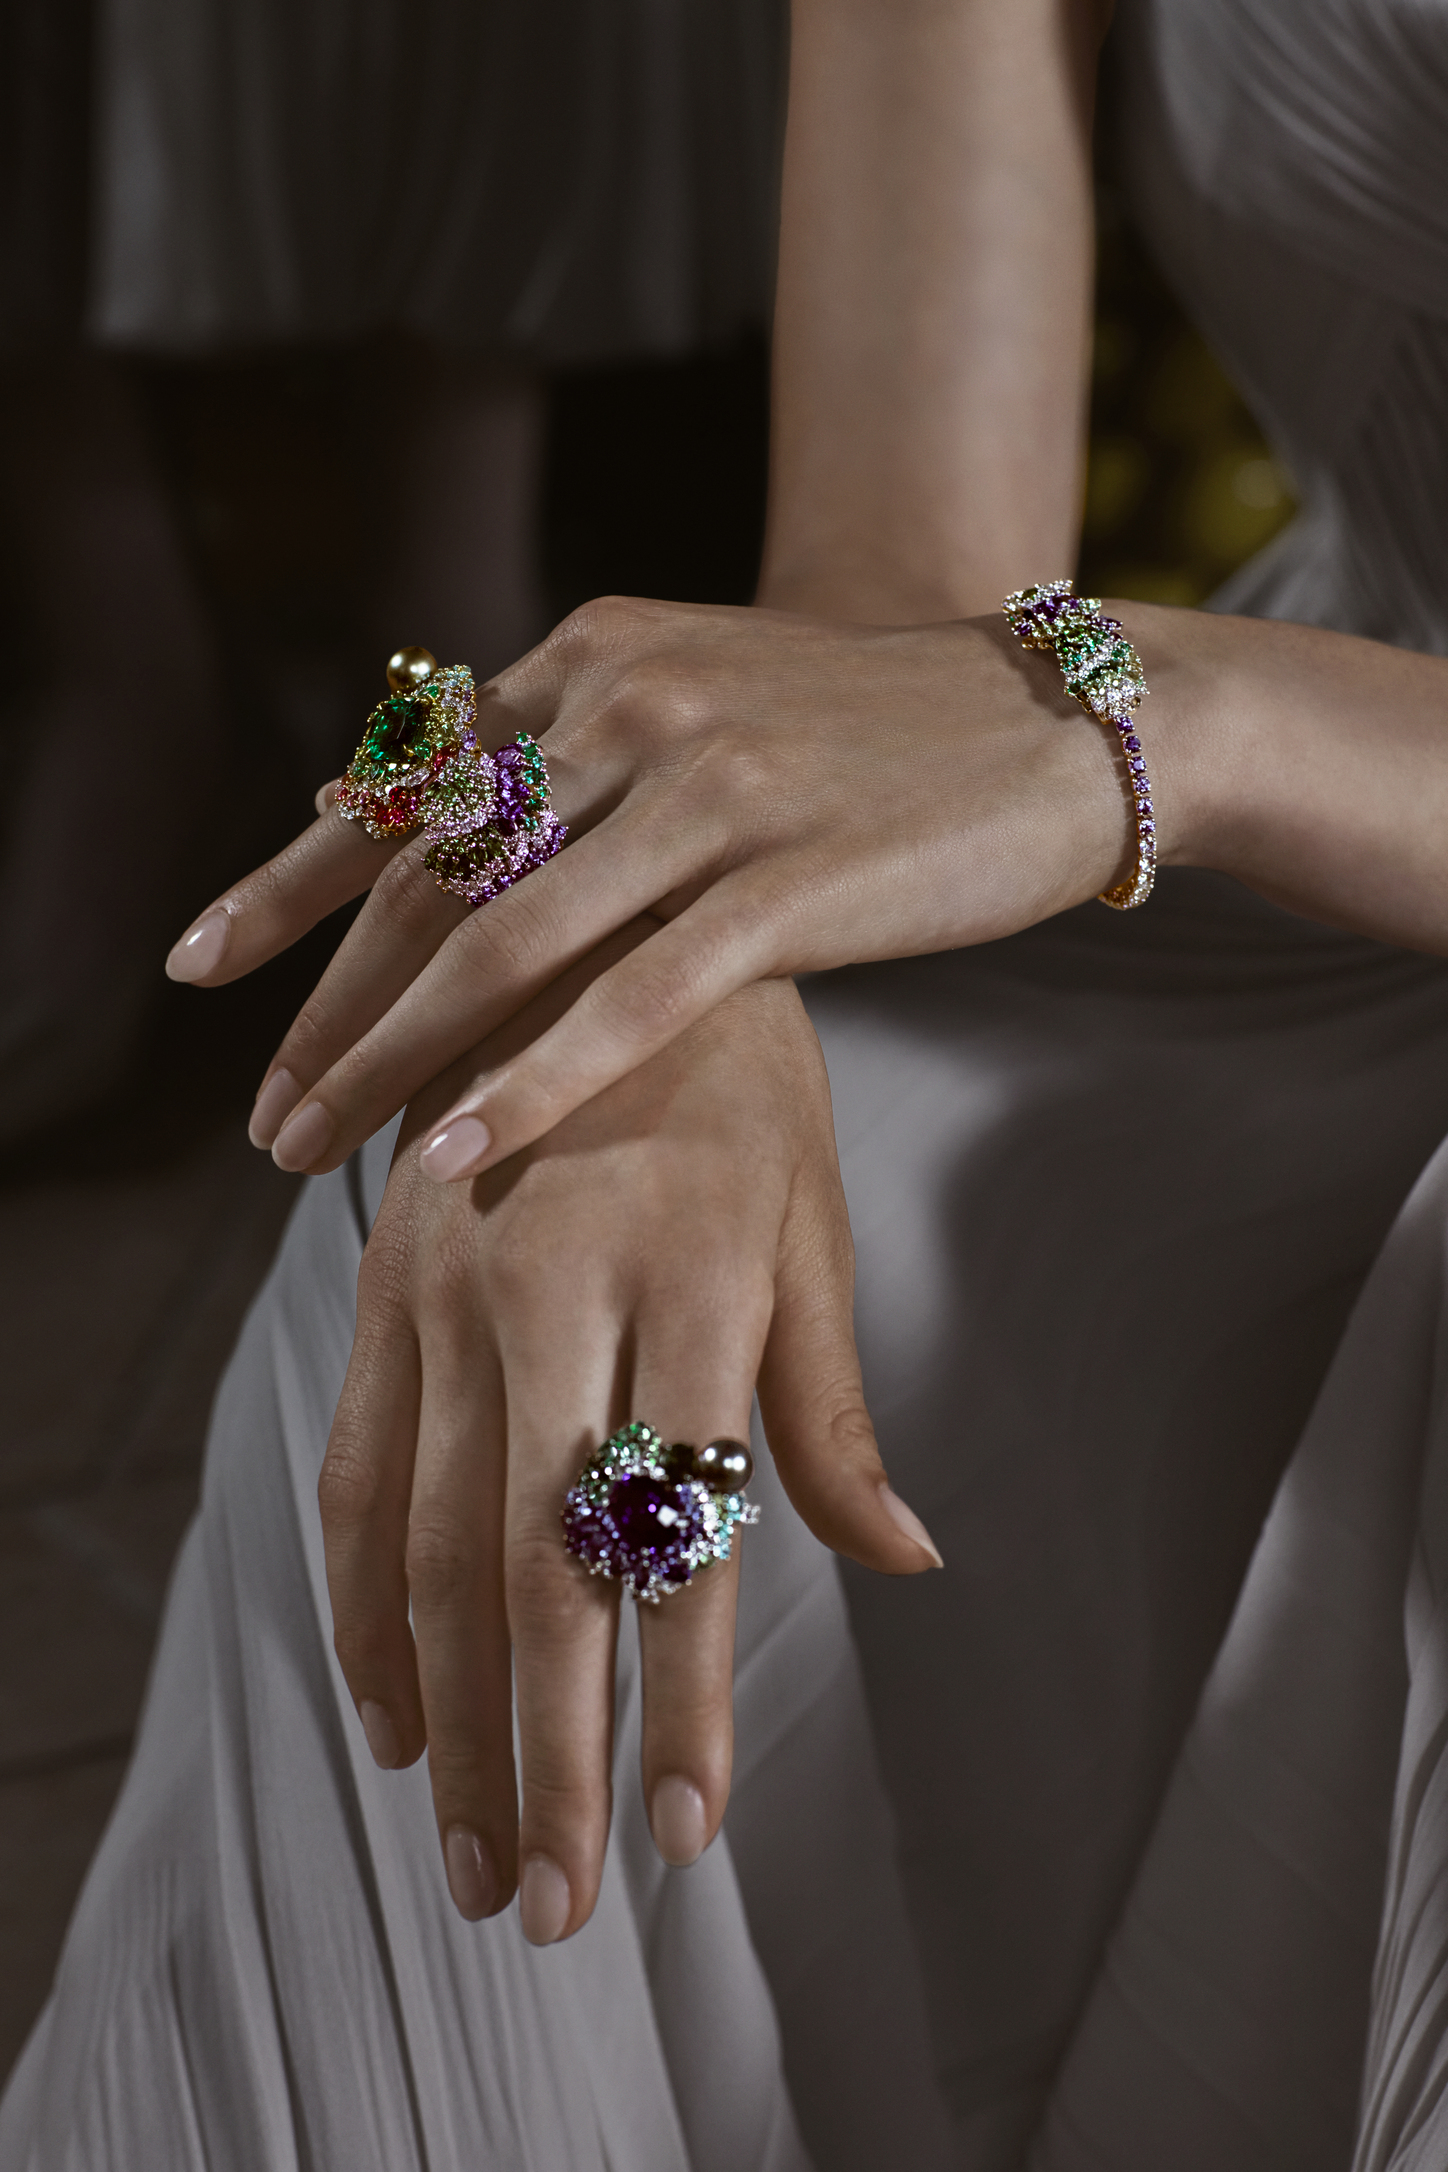 Bulgari Eden, Dior Print and more—dazzling new high jewellery collections to pay attention to (фото 11)